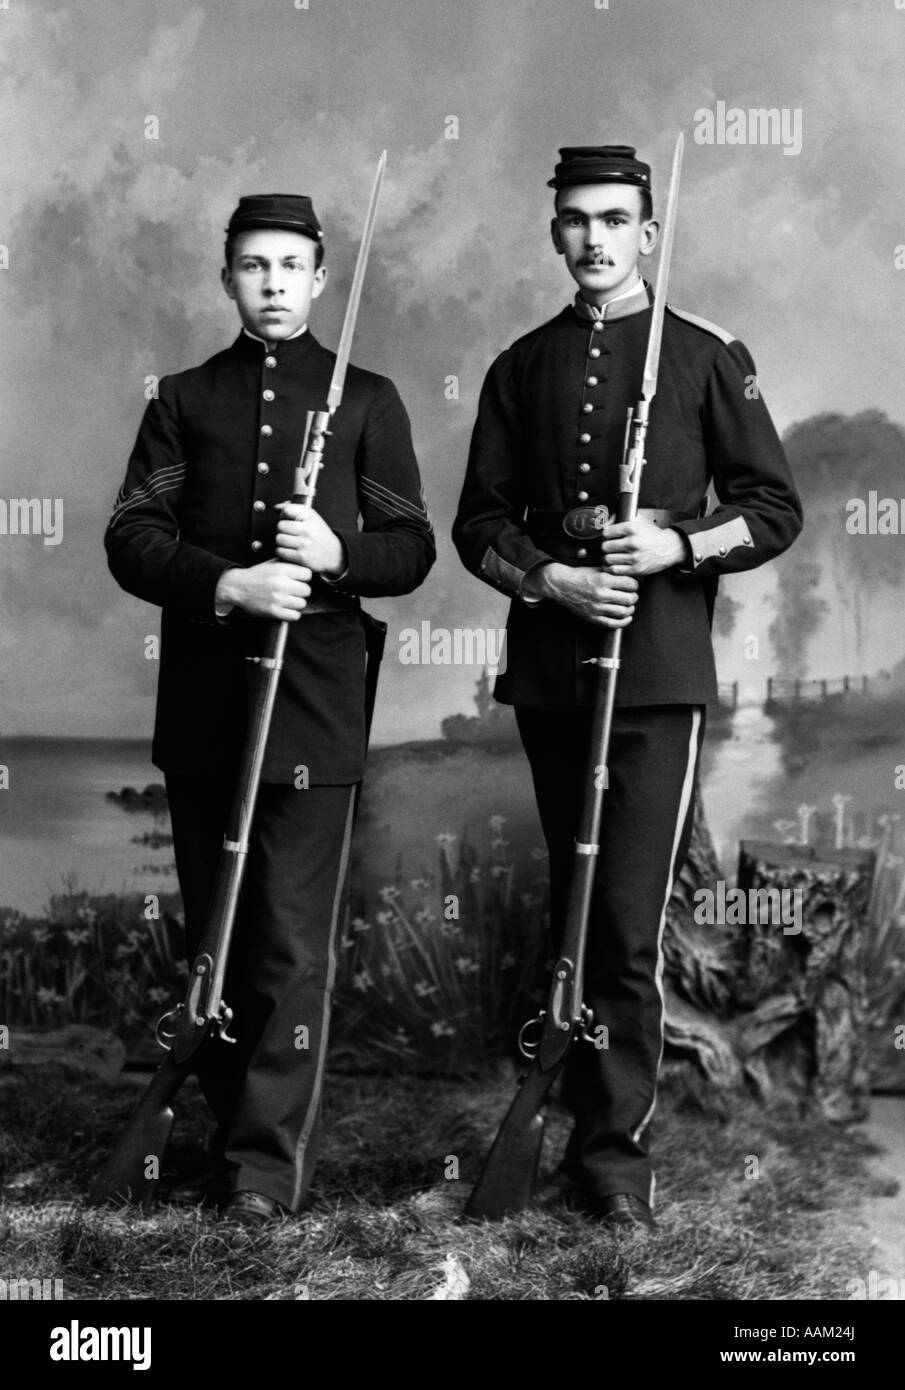 PORTRAIT OF TWO UNION SOLDIERS STANDING HOLDING BAYONETS Stock Photo